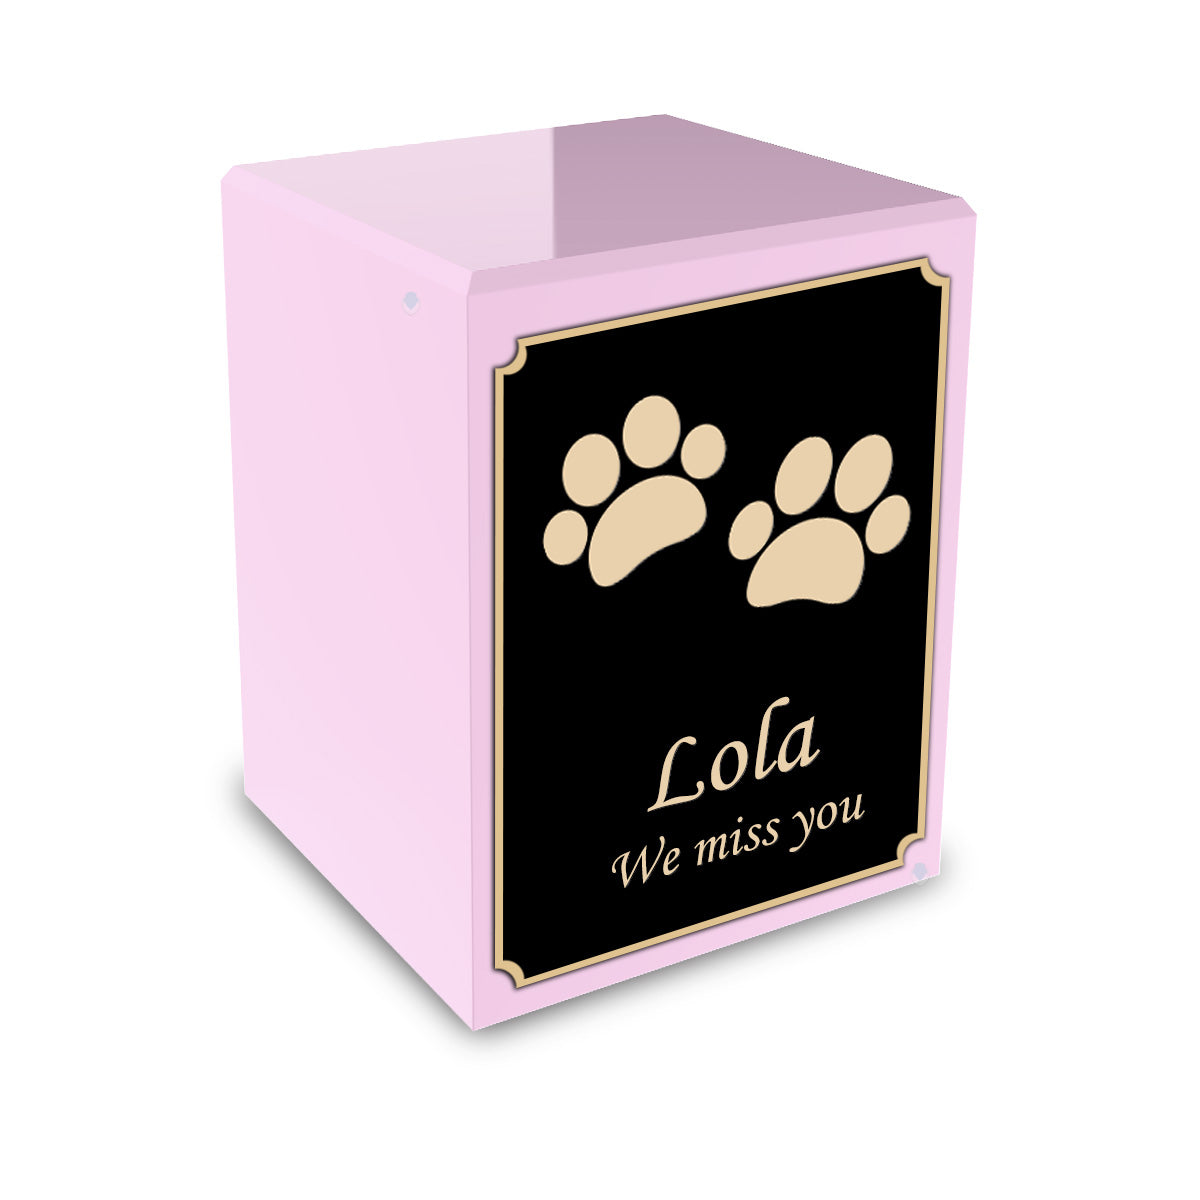 Custom Engraved Heritage Light Pink Walking Paws Small Pet Cremation Urn Memorial Box for Ashes